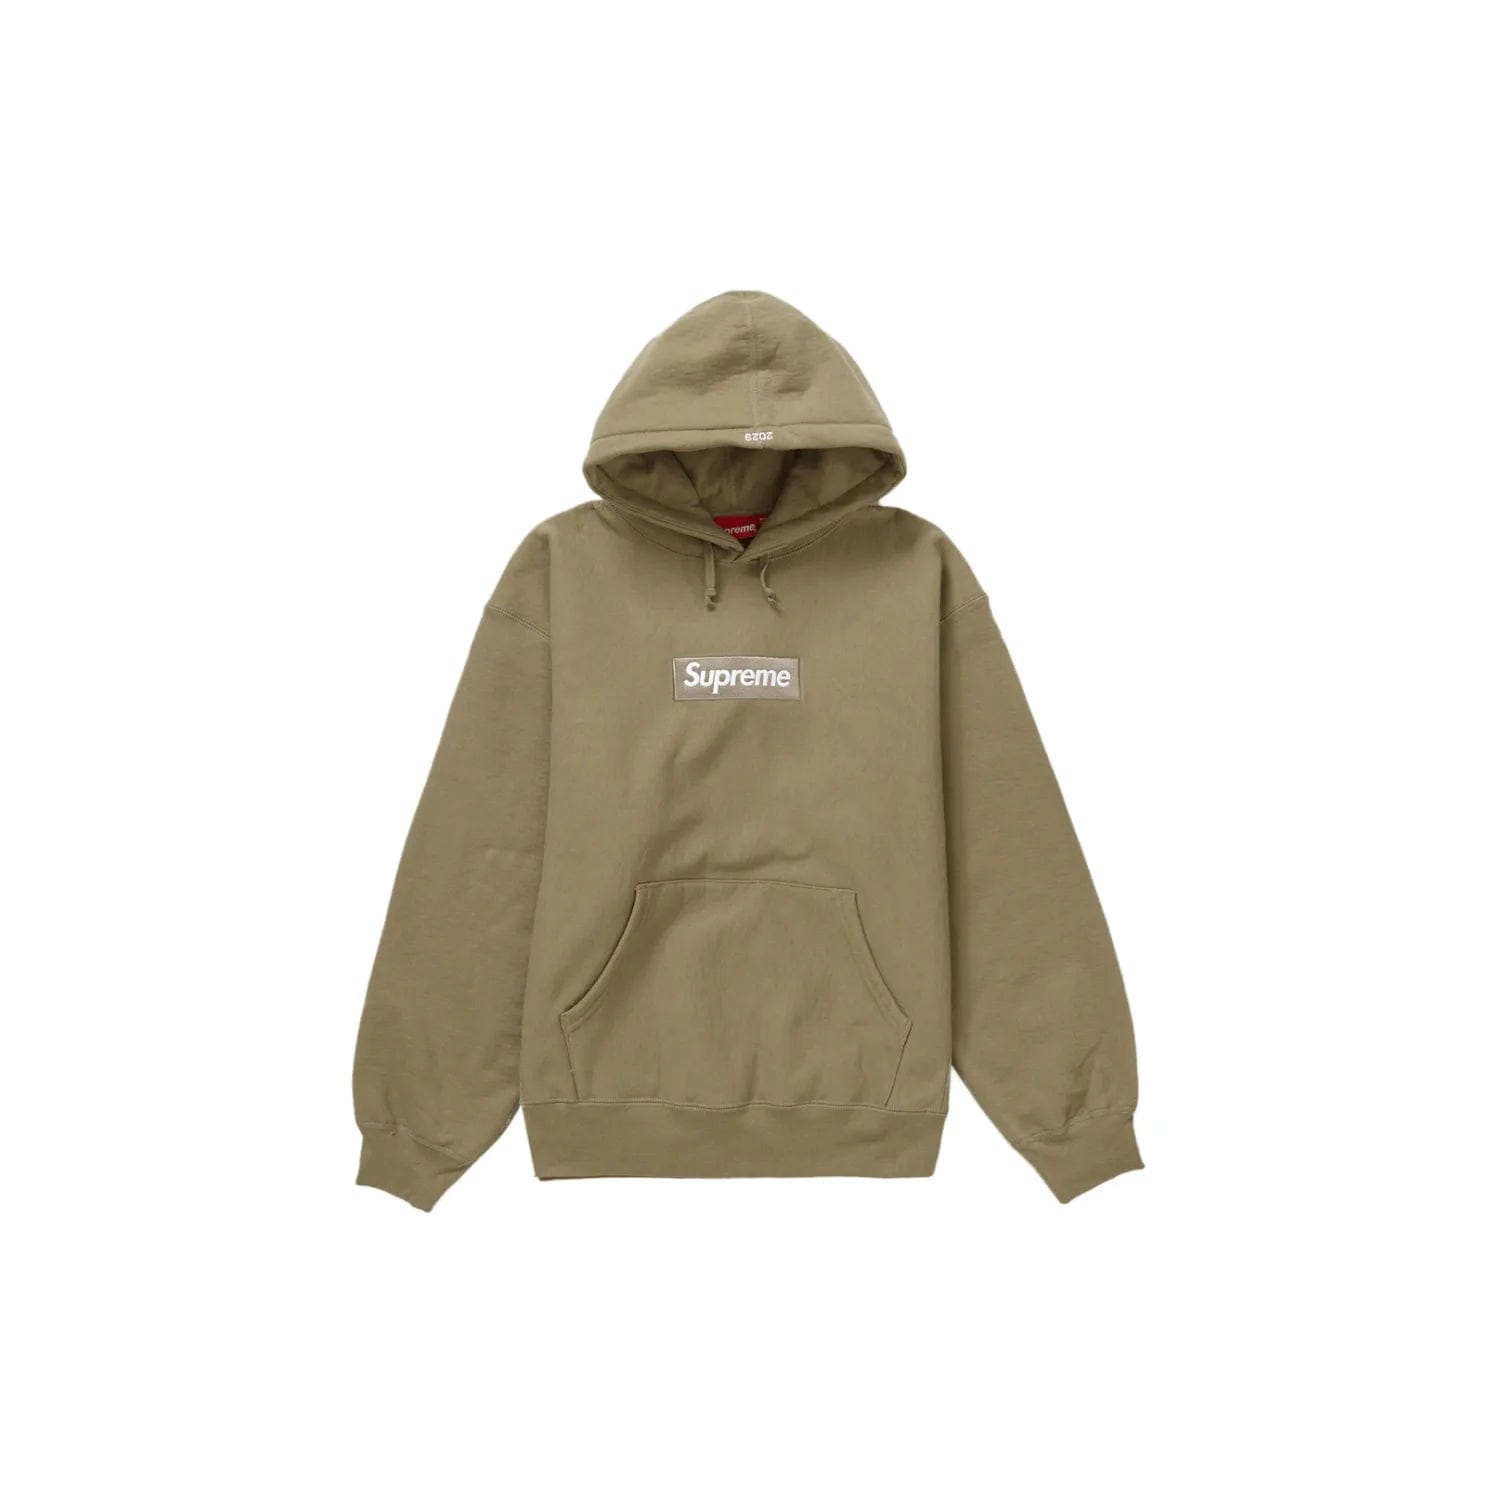 Supreme Box Logo Hooded Sweatshirt (FW23) Dark Sand - Image 1 - Only at www.BallersClubKickz.com - Add a modern edge to your wardrobe with the FW23 Supreme Box Logo hoodie in Dark Sand. High-quality construction combined with a logo printed on the chest create a sleek, timeless look.